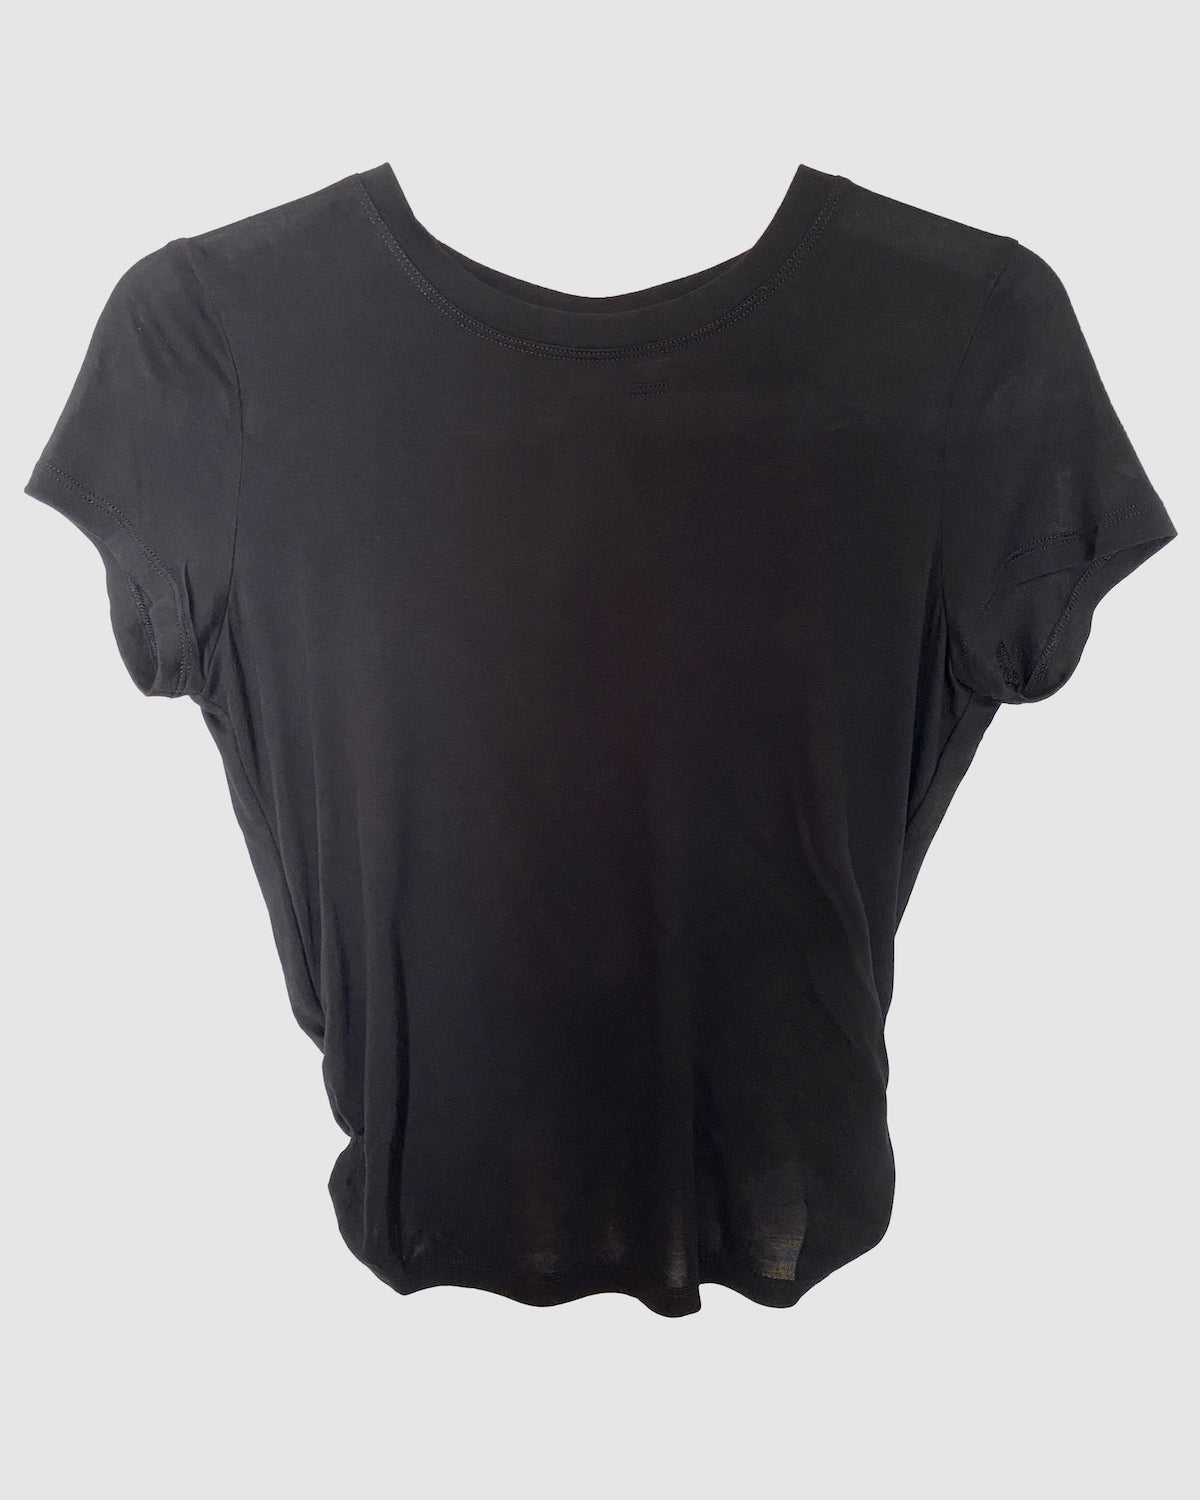 black cutout back cropped sports tee *pre-order*